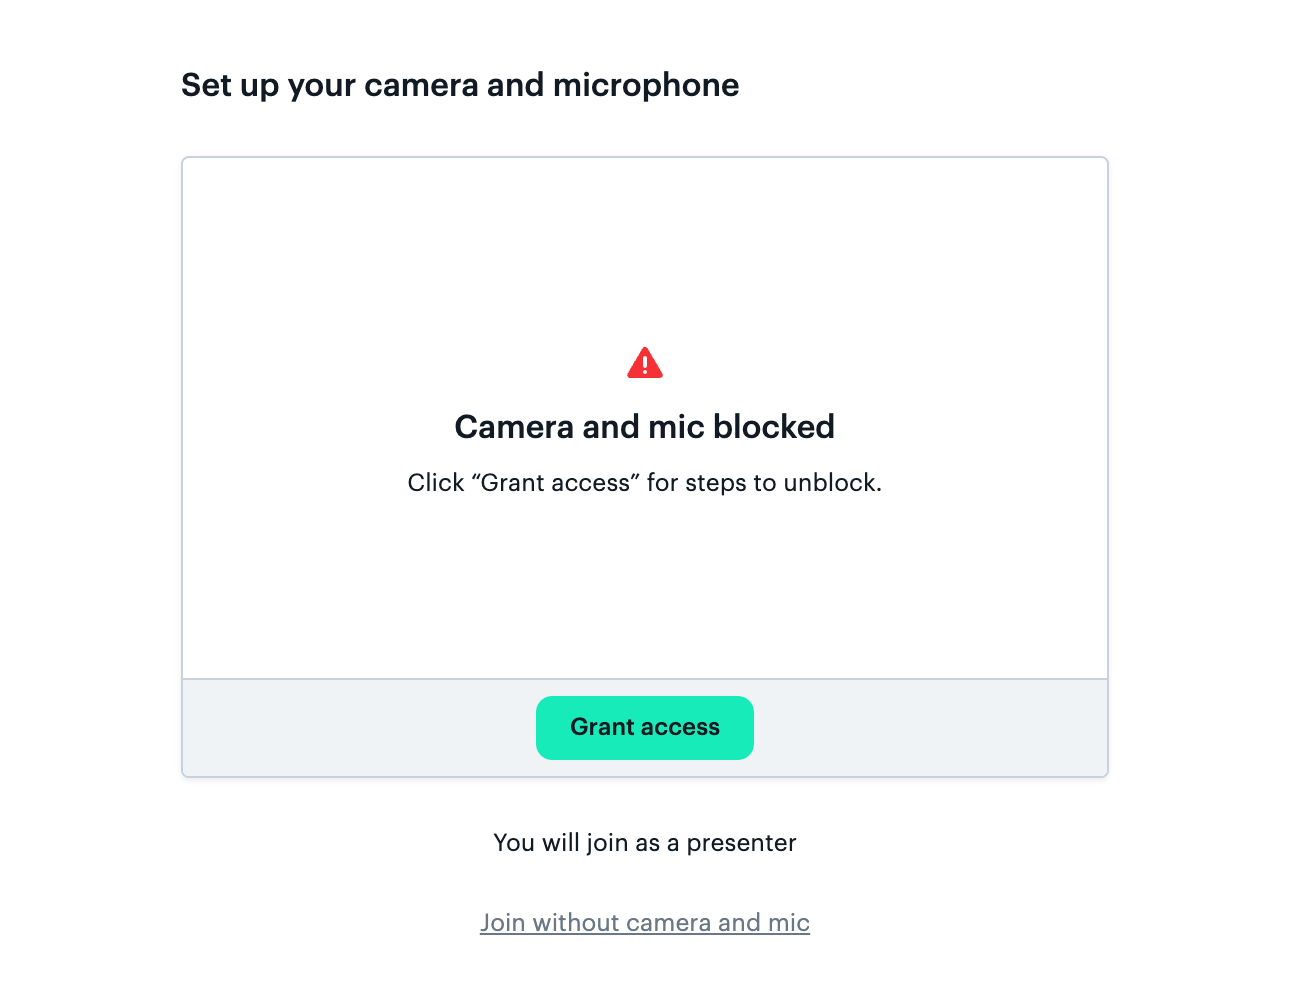 Pop up displays "Camera and mic blocked" in Daily prebuilt video chat